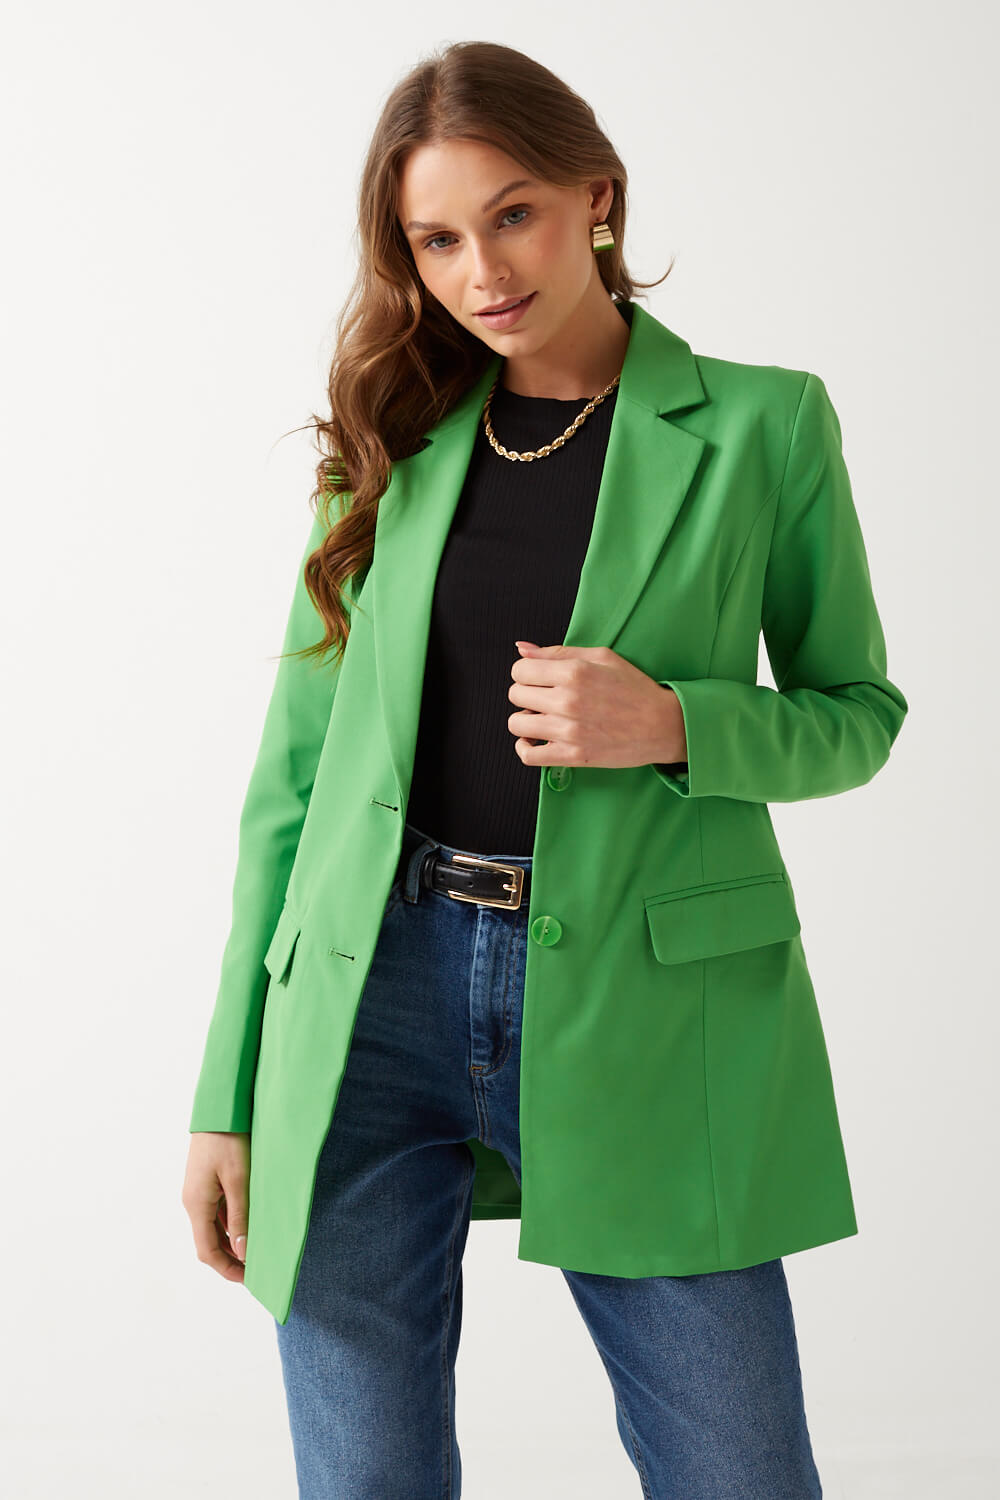 Only Maia Long Blazer in Green | iCLOTHING - iCLOTHING